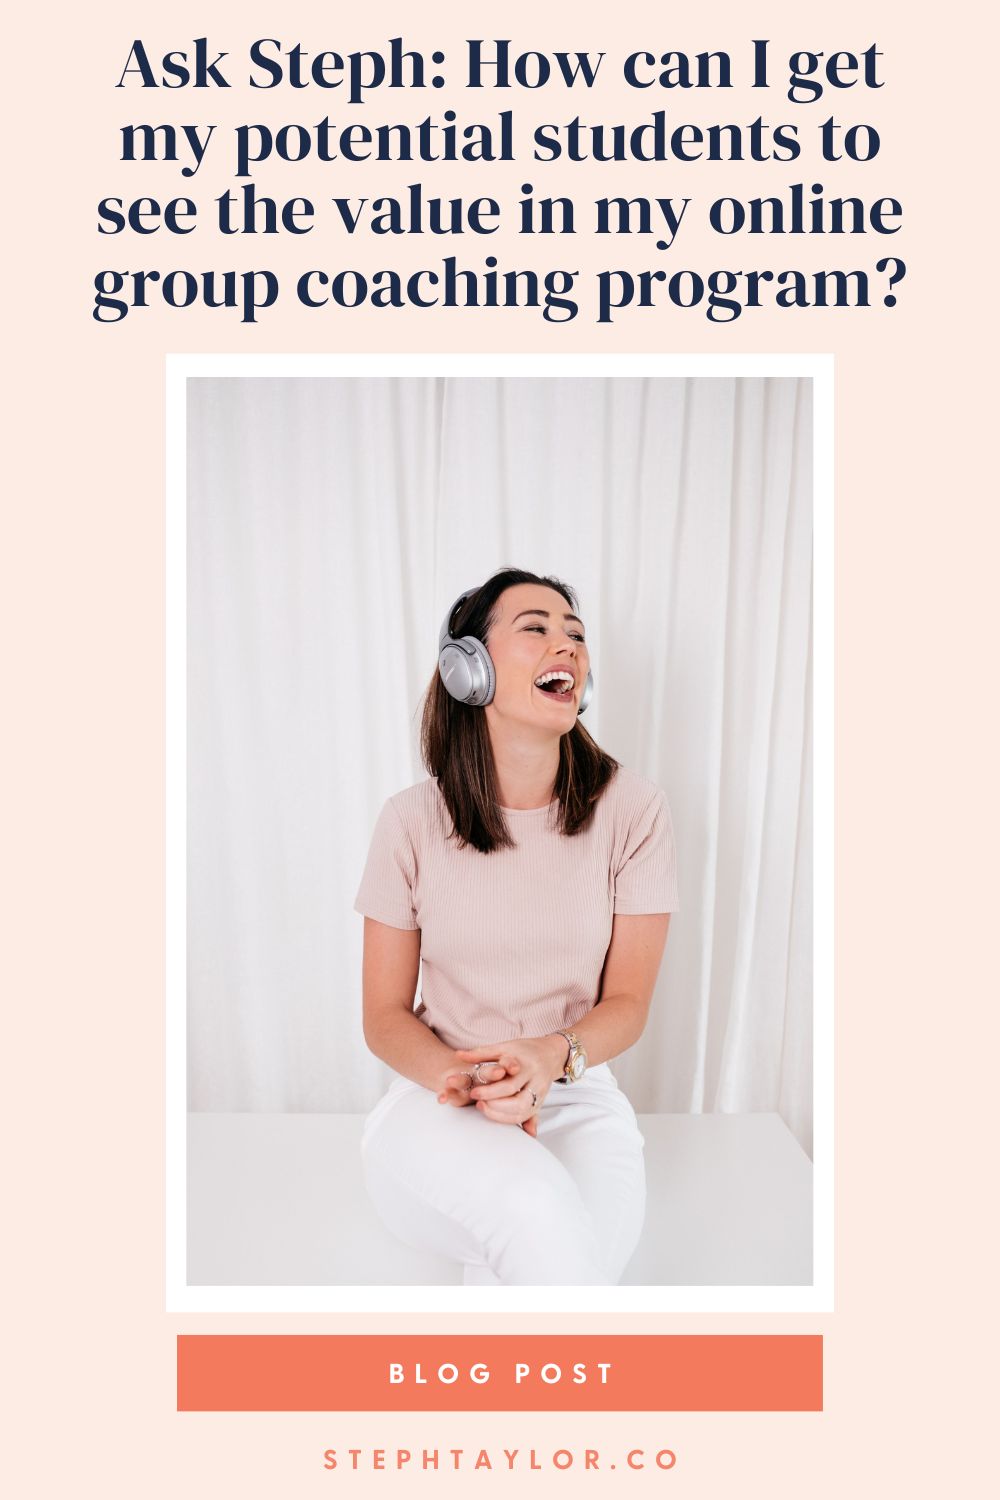 Ask Steph: How can I get my potential students to see the value in my online group coaching program?